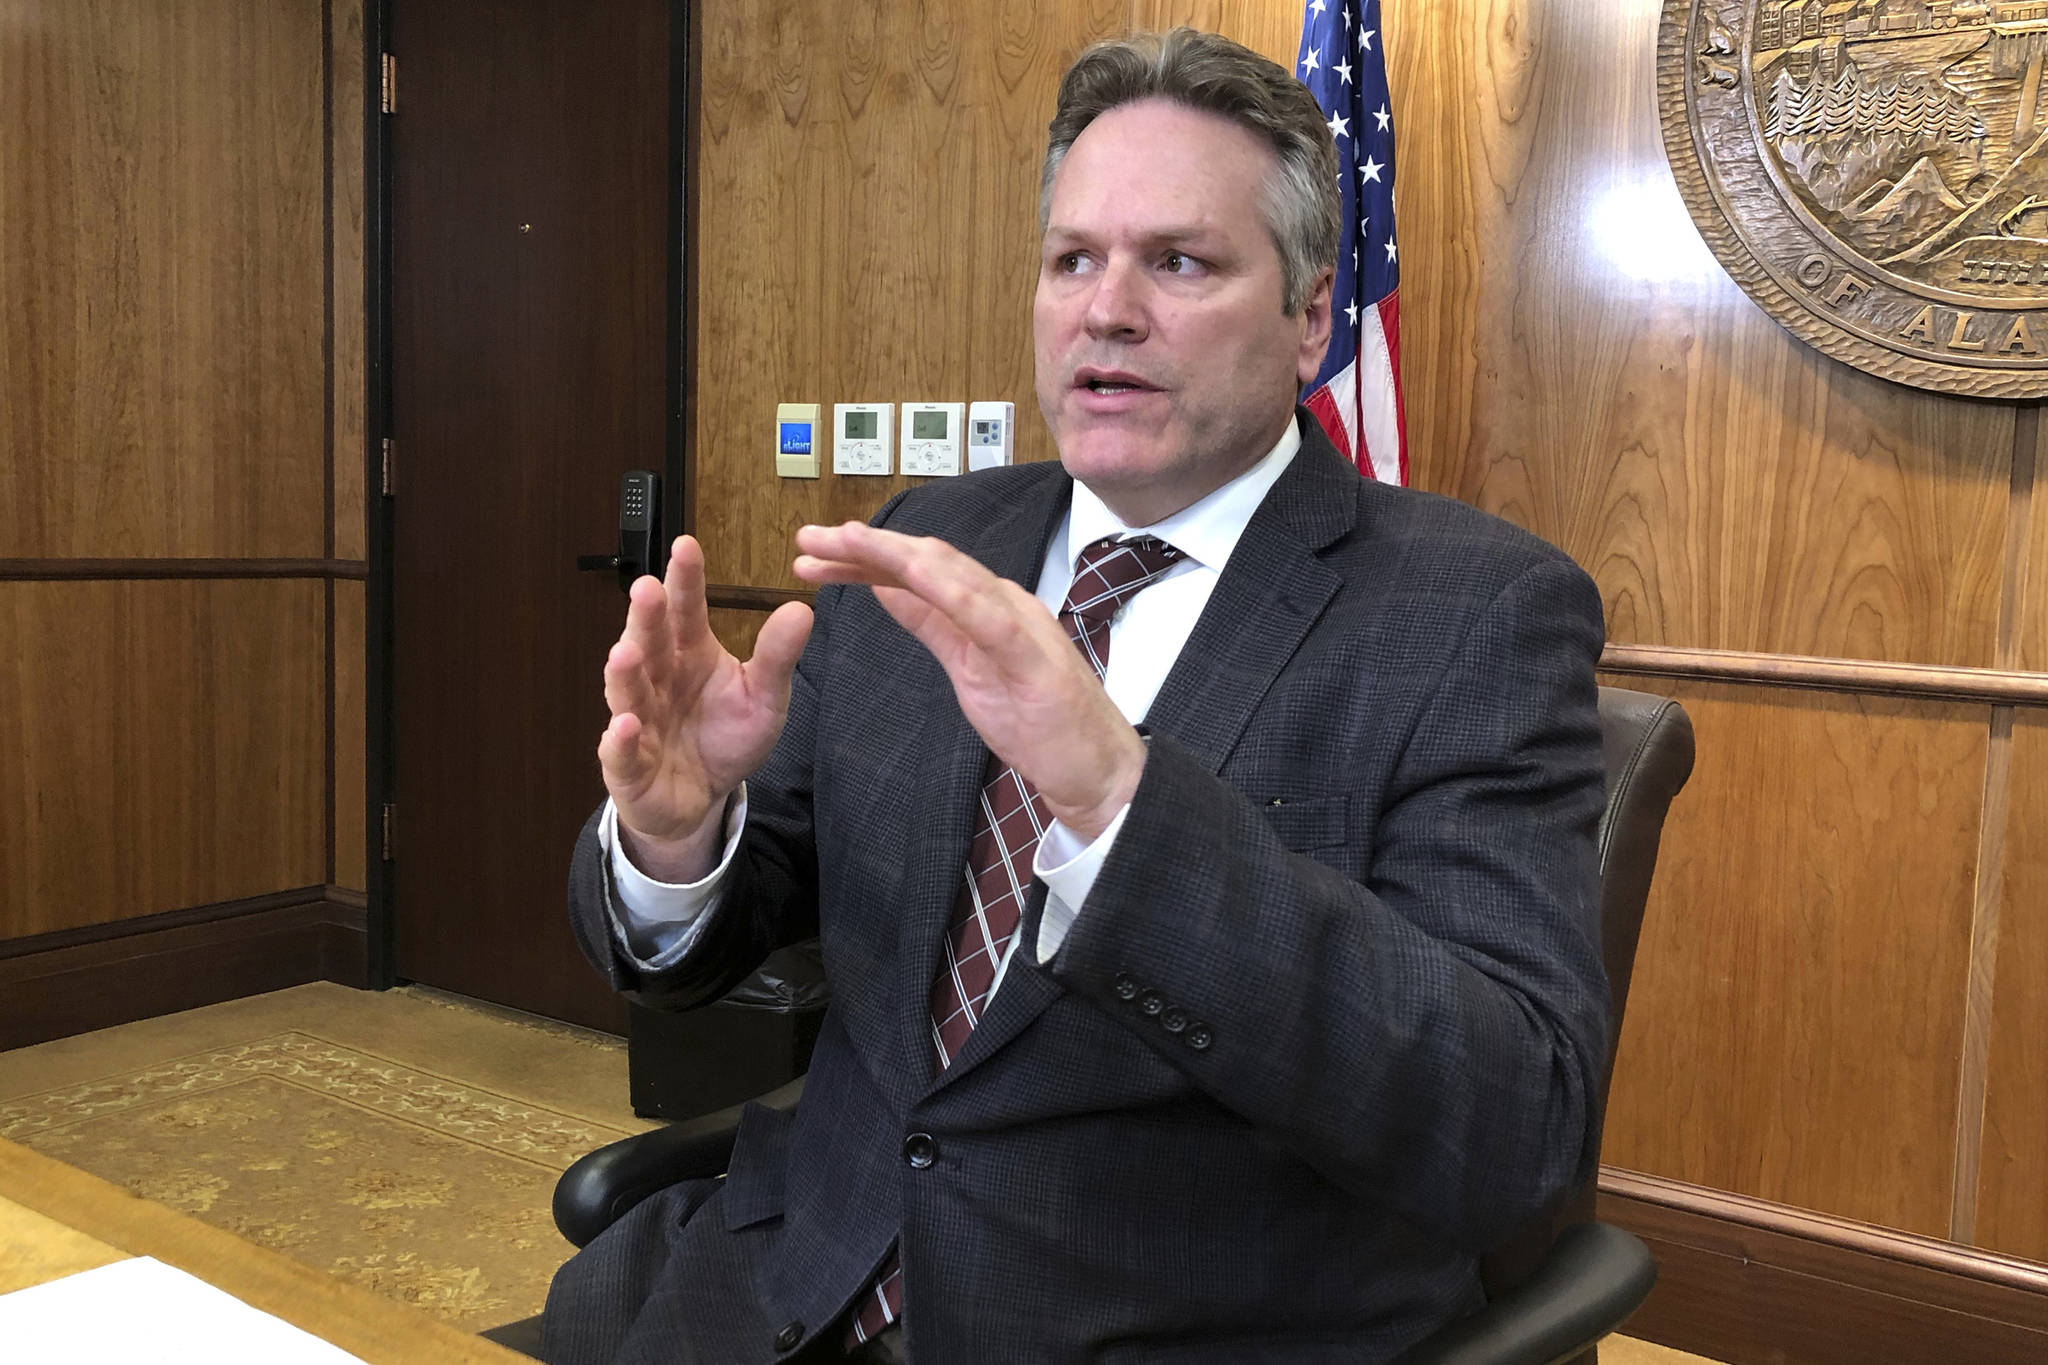 In this March 8 photo, Gov. Mike Dunleavy talks to reporters during a news conference in Juneau, Alaska. (Becky Bohrer | Associated Press File)